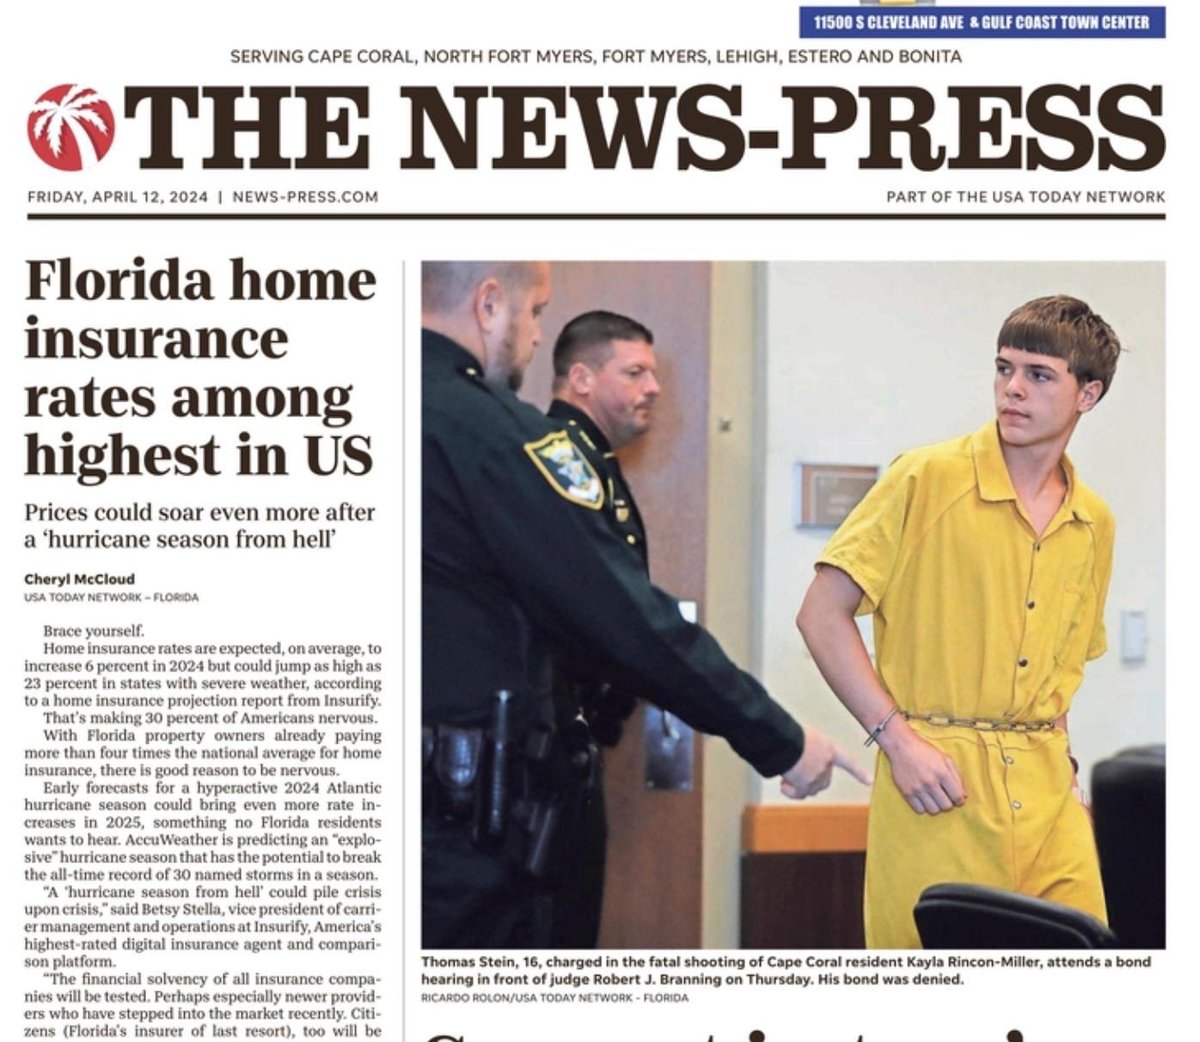 In Southwest Florida’s @TheNewsPress this morning >> 04.12.24 “Florida home insurance rates among the highest in the U.S.” Reminder that Florida Republicans hold a supermajority in the legislature and have done ABSOLUTELY NOTHING to fix this.